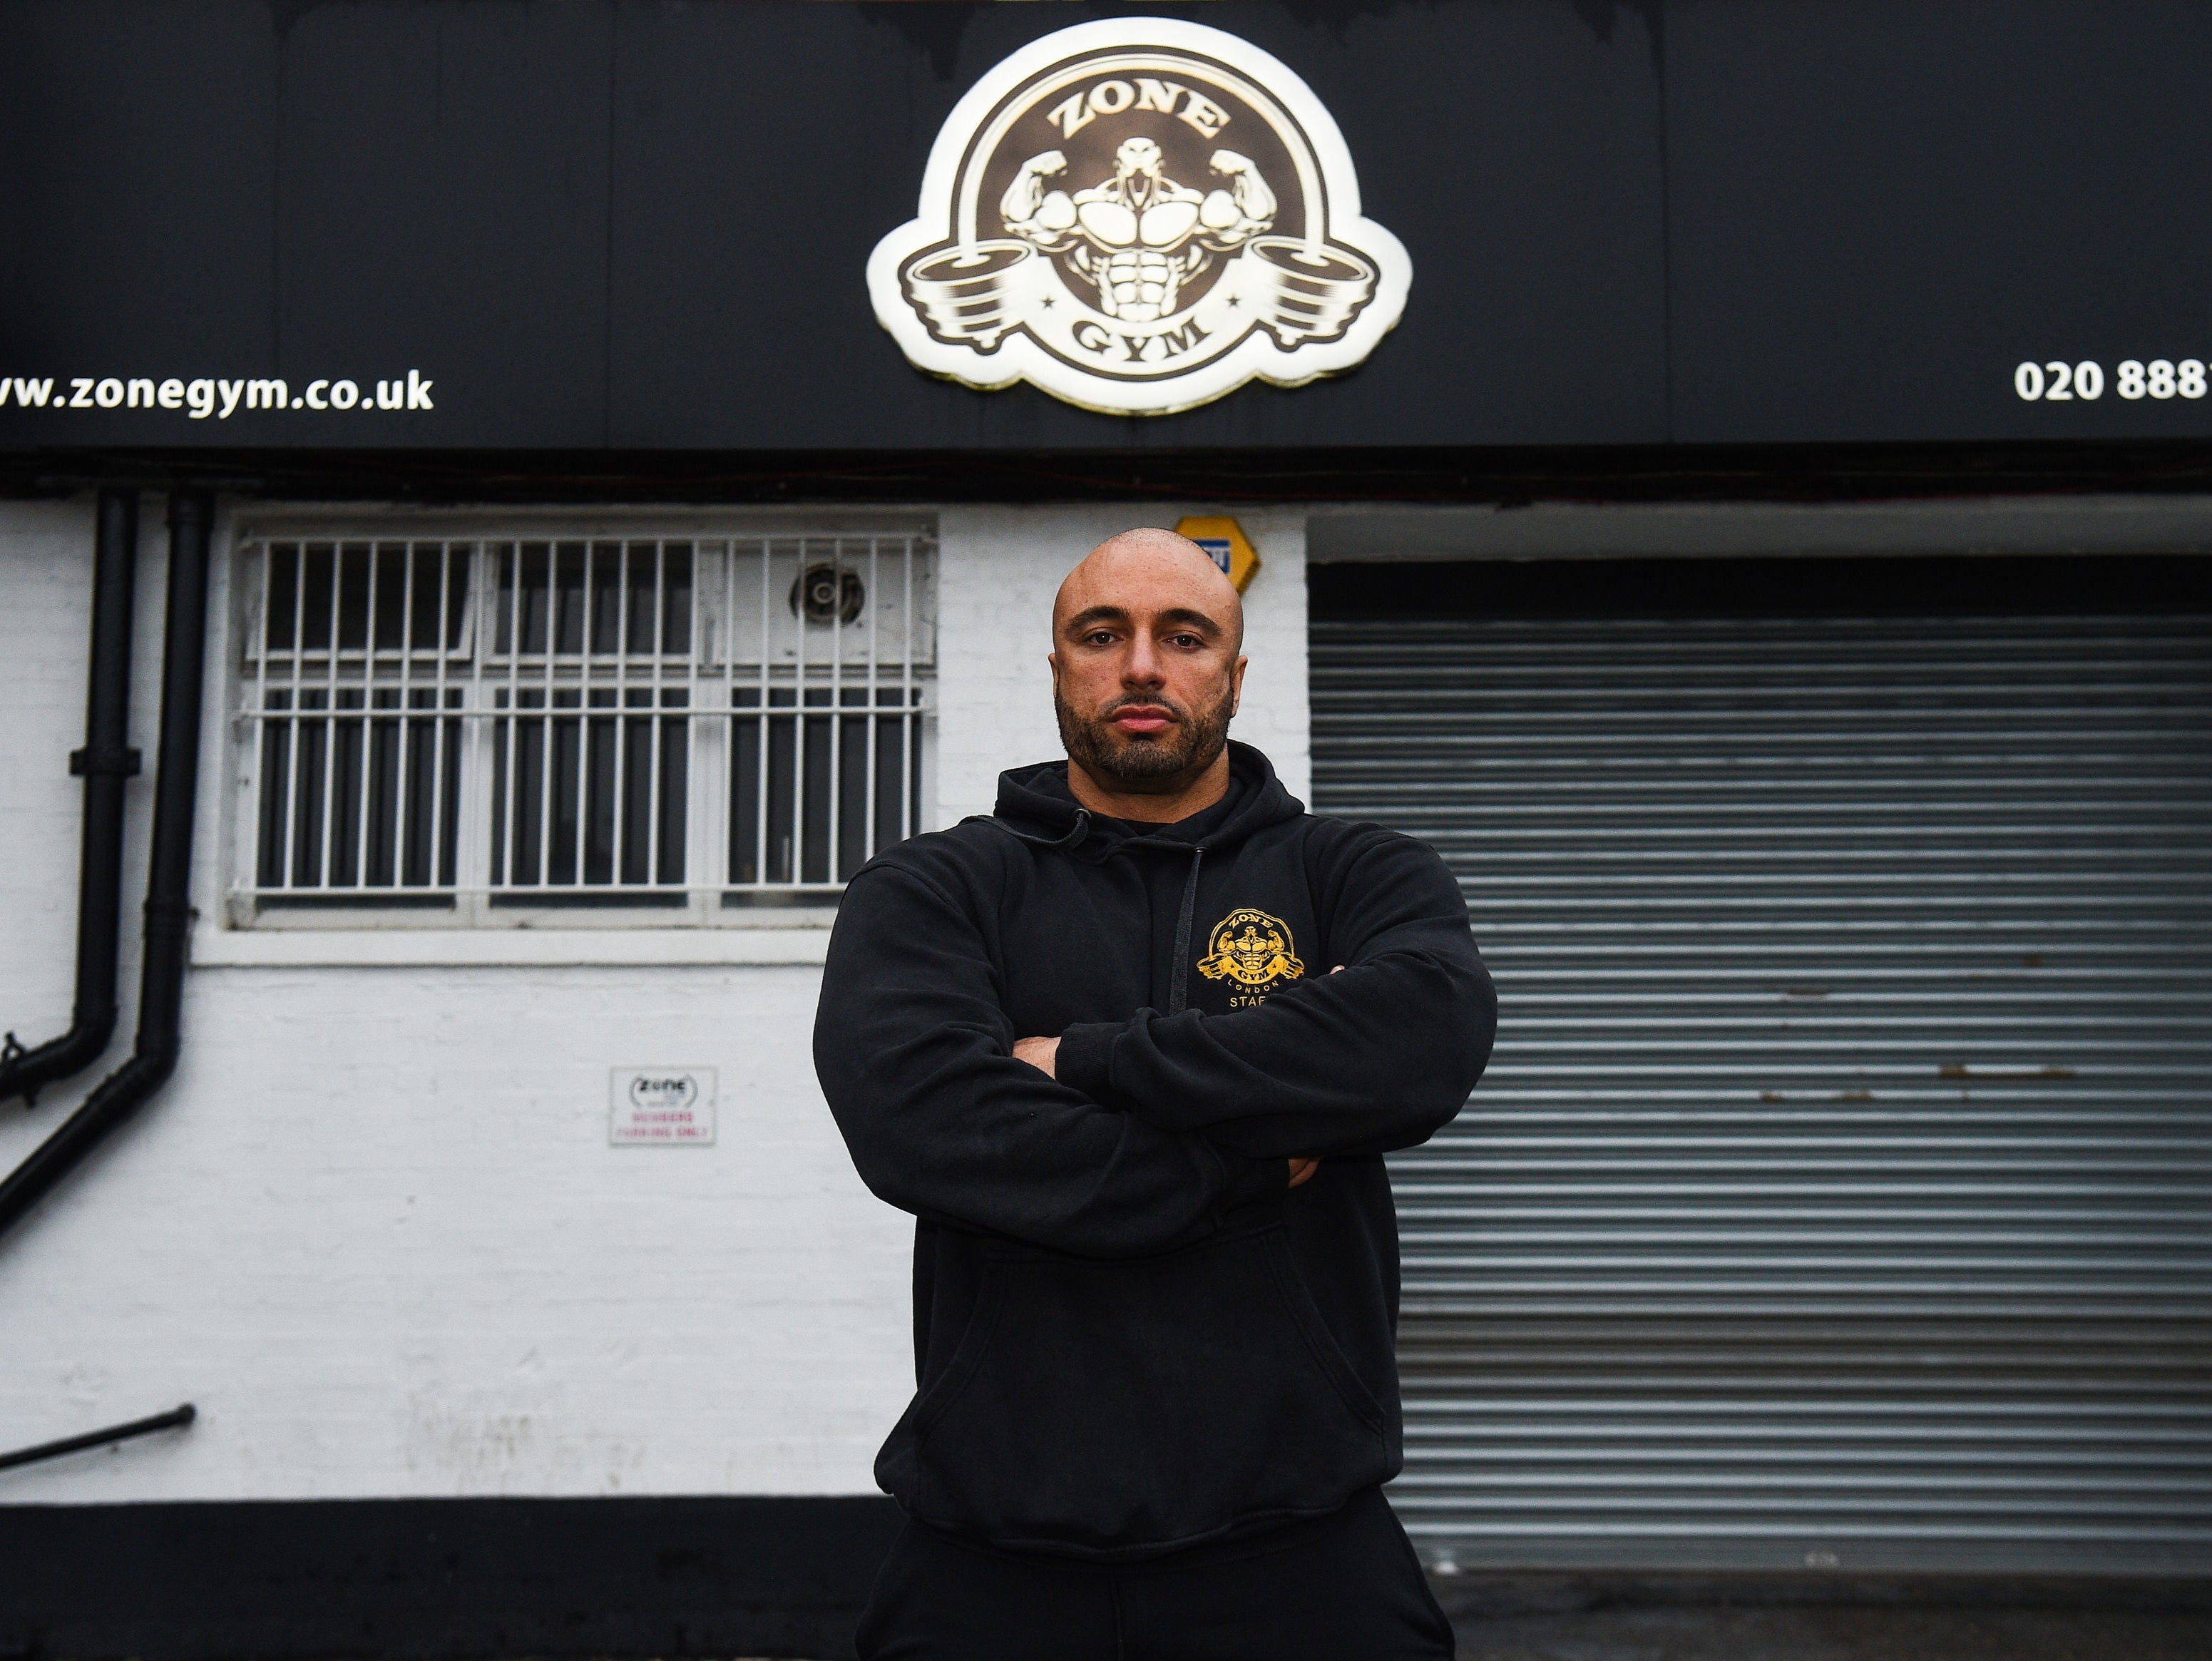 Andreas Michli had defied lockdown rules by keeping his gym open